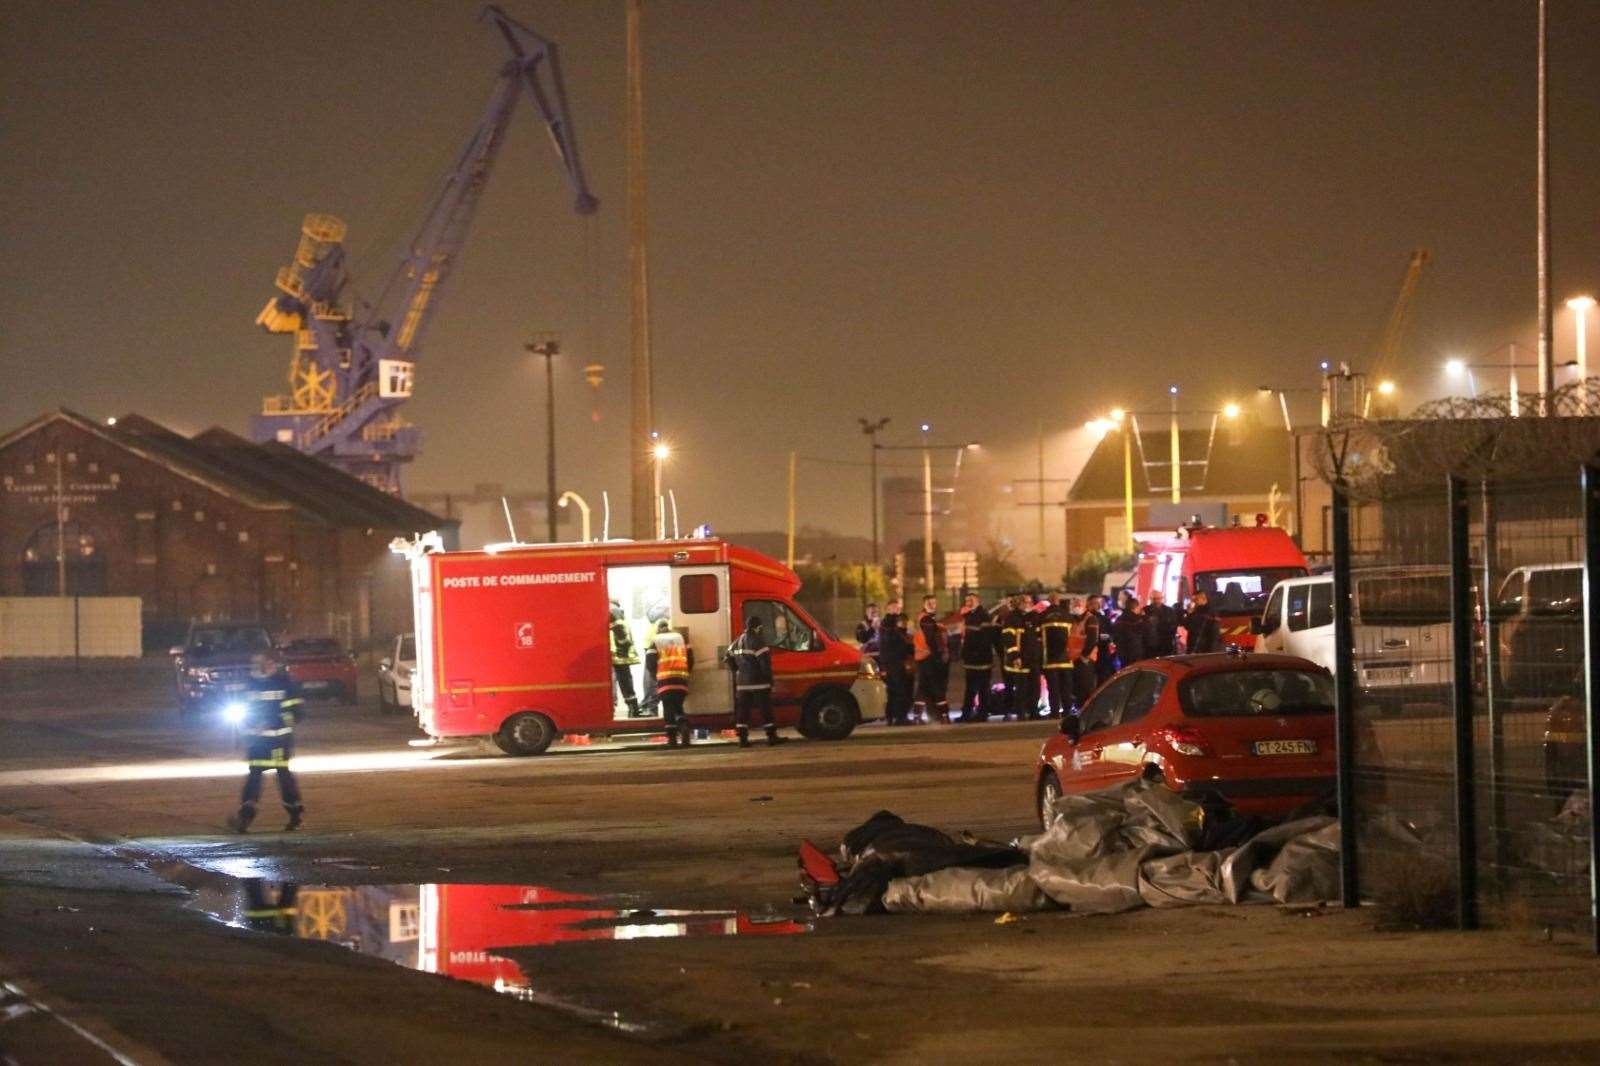 Emergency services work to recover bodies of at least 27 people who drowned off Calais Picture: UKNIP